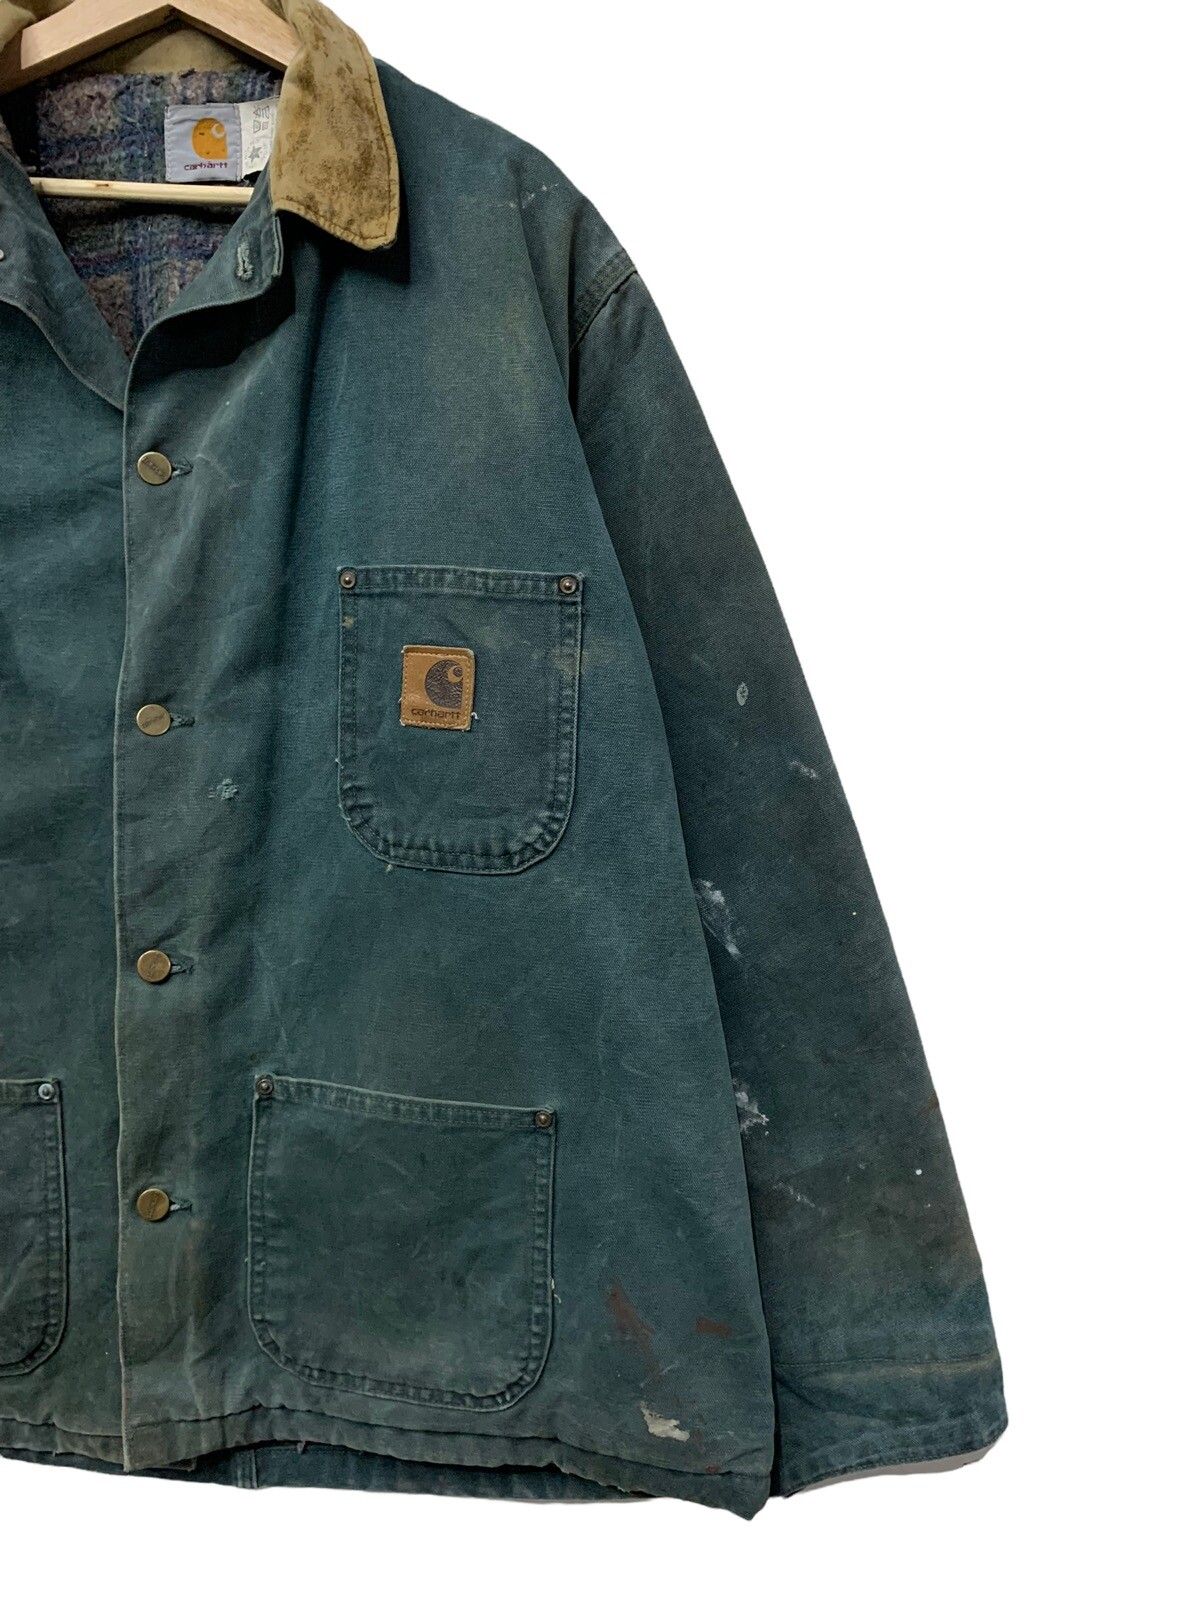 🔥DISTRESSED CARHARTT WORKERS CHORE JACKETS - 5